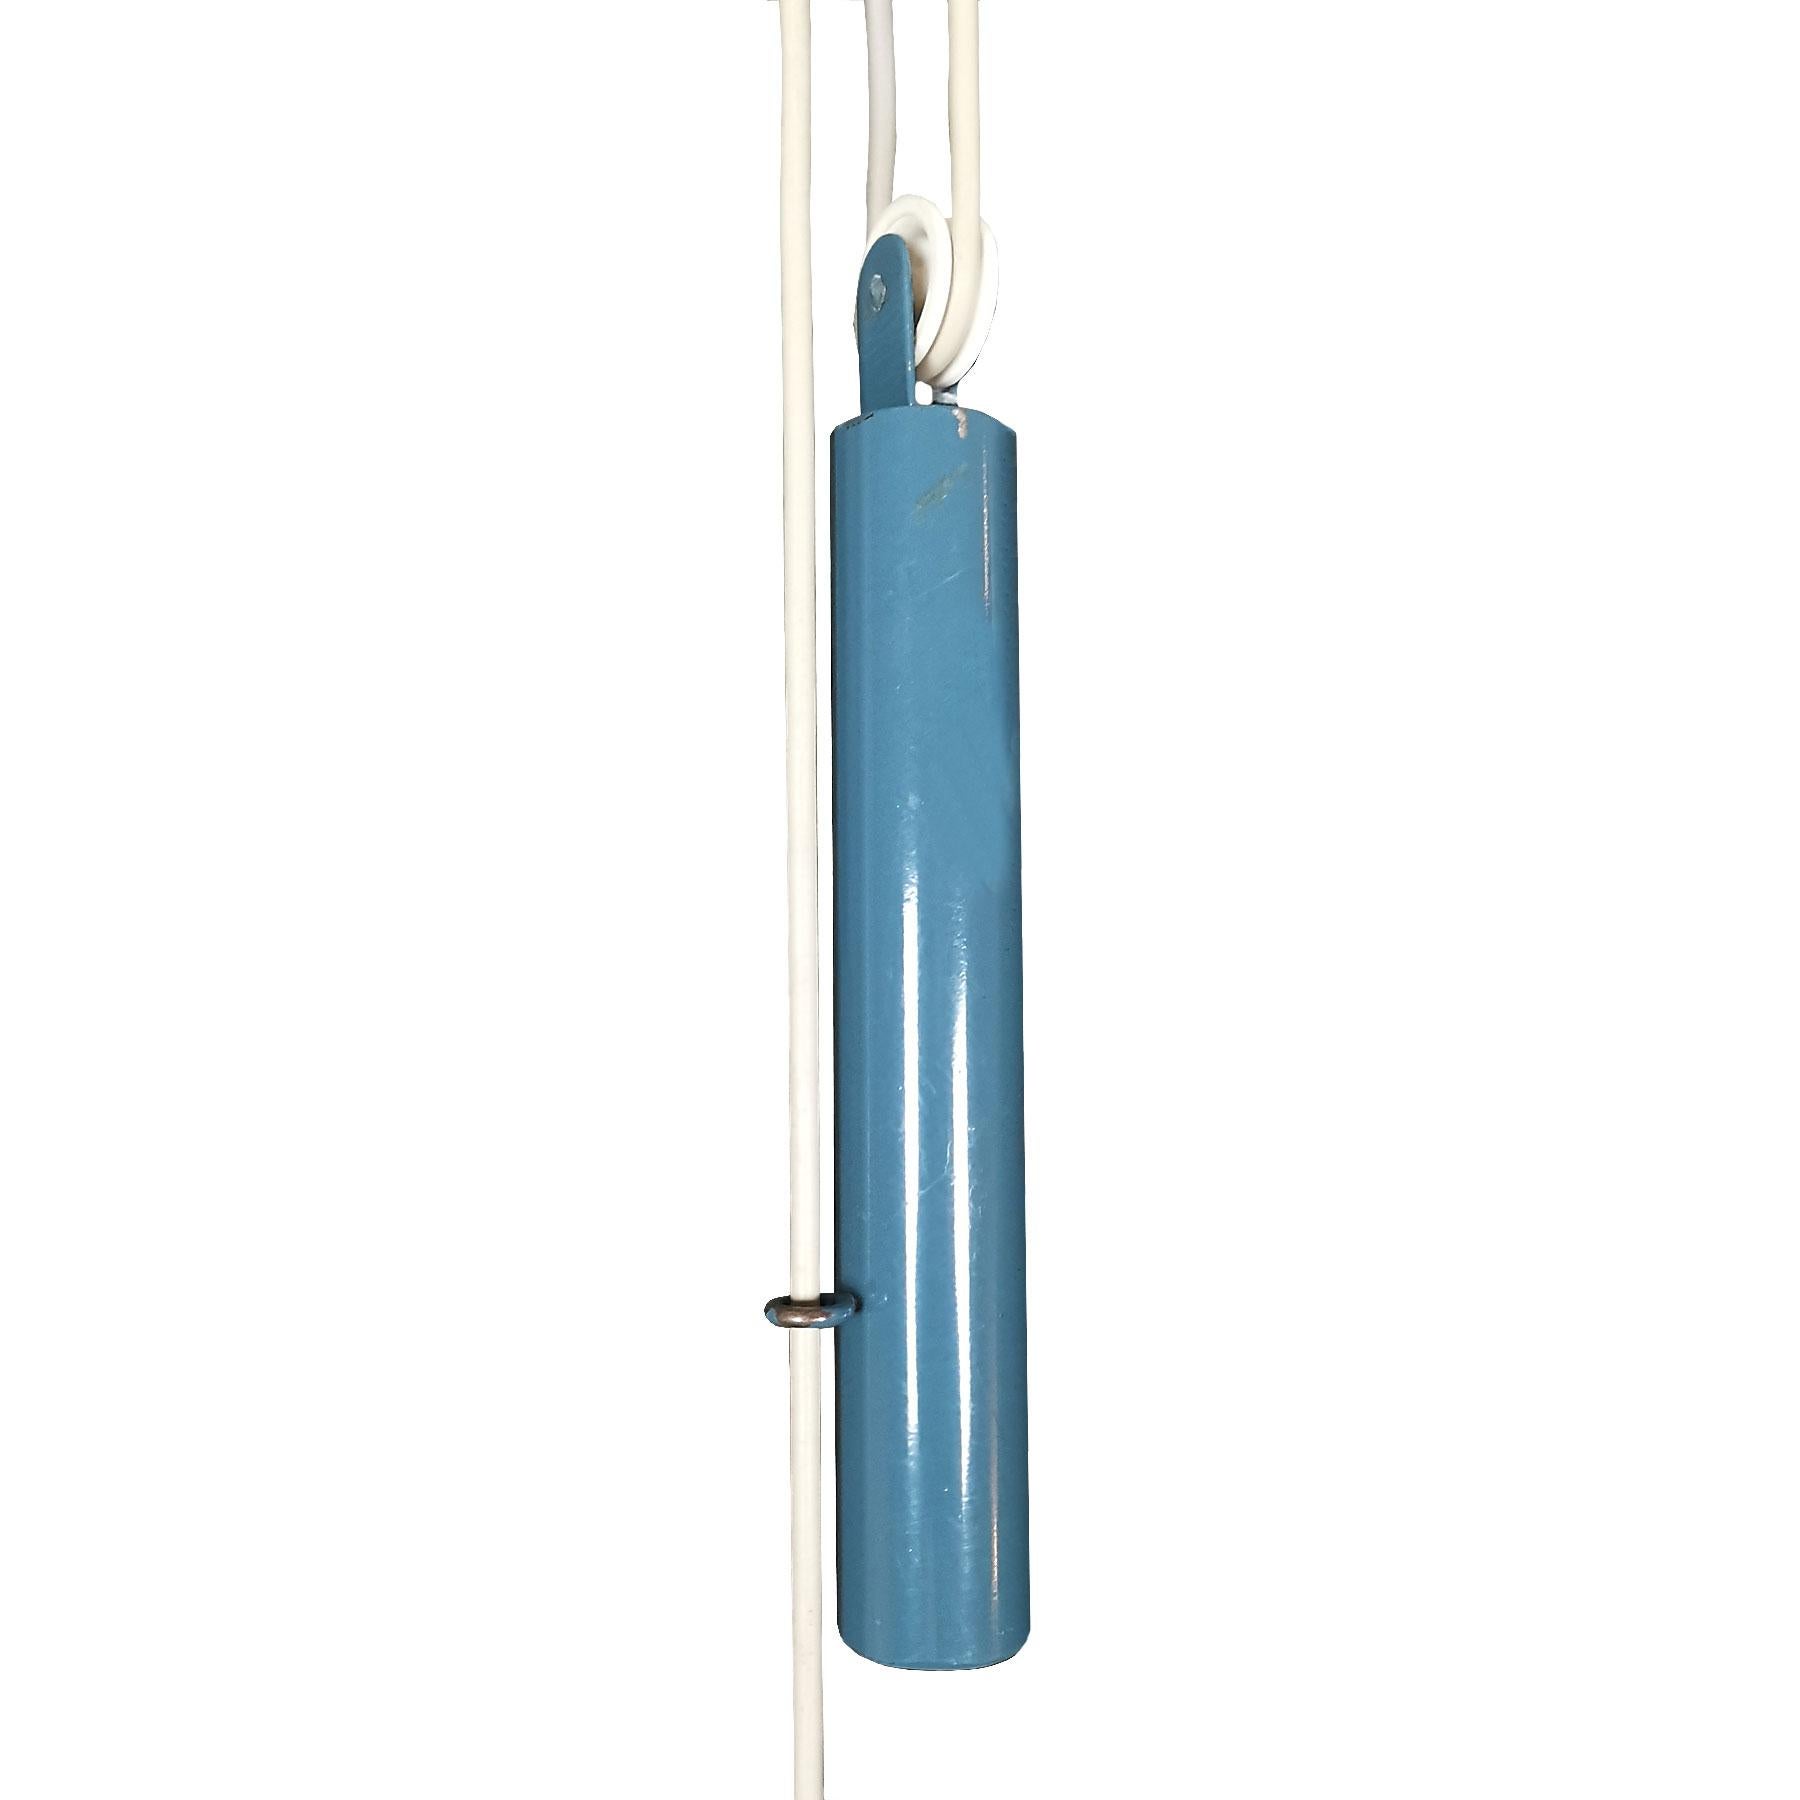 Mid-Century Modern 1940s Ceiling Lamp with Counterweight System, Blue Sheet Metal, Glass, Italy